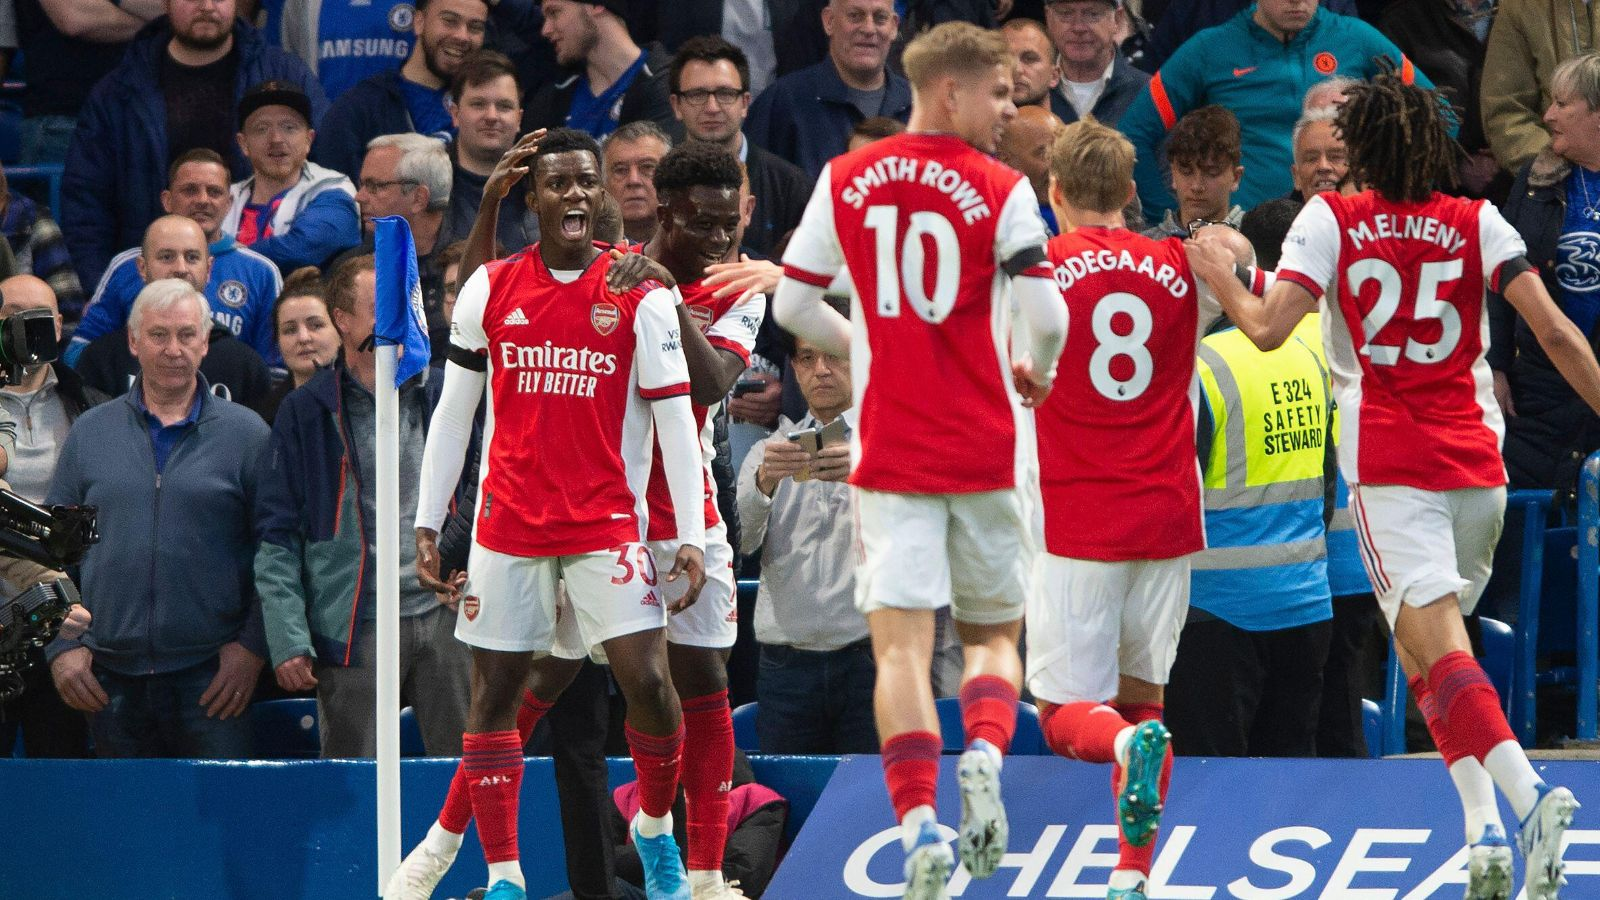 Arsenal handed Chelsea a 4-2 drubbing